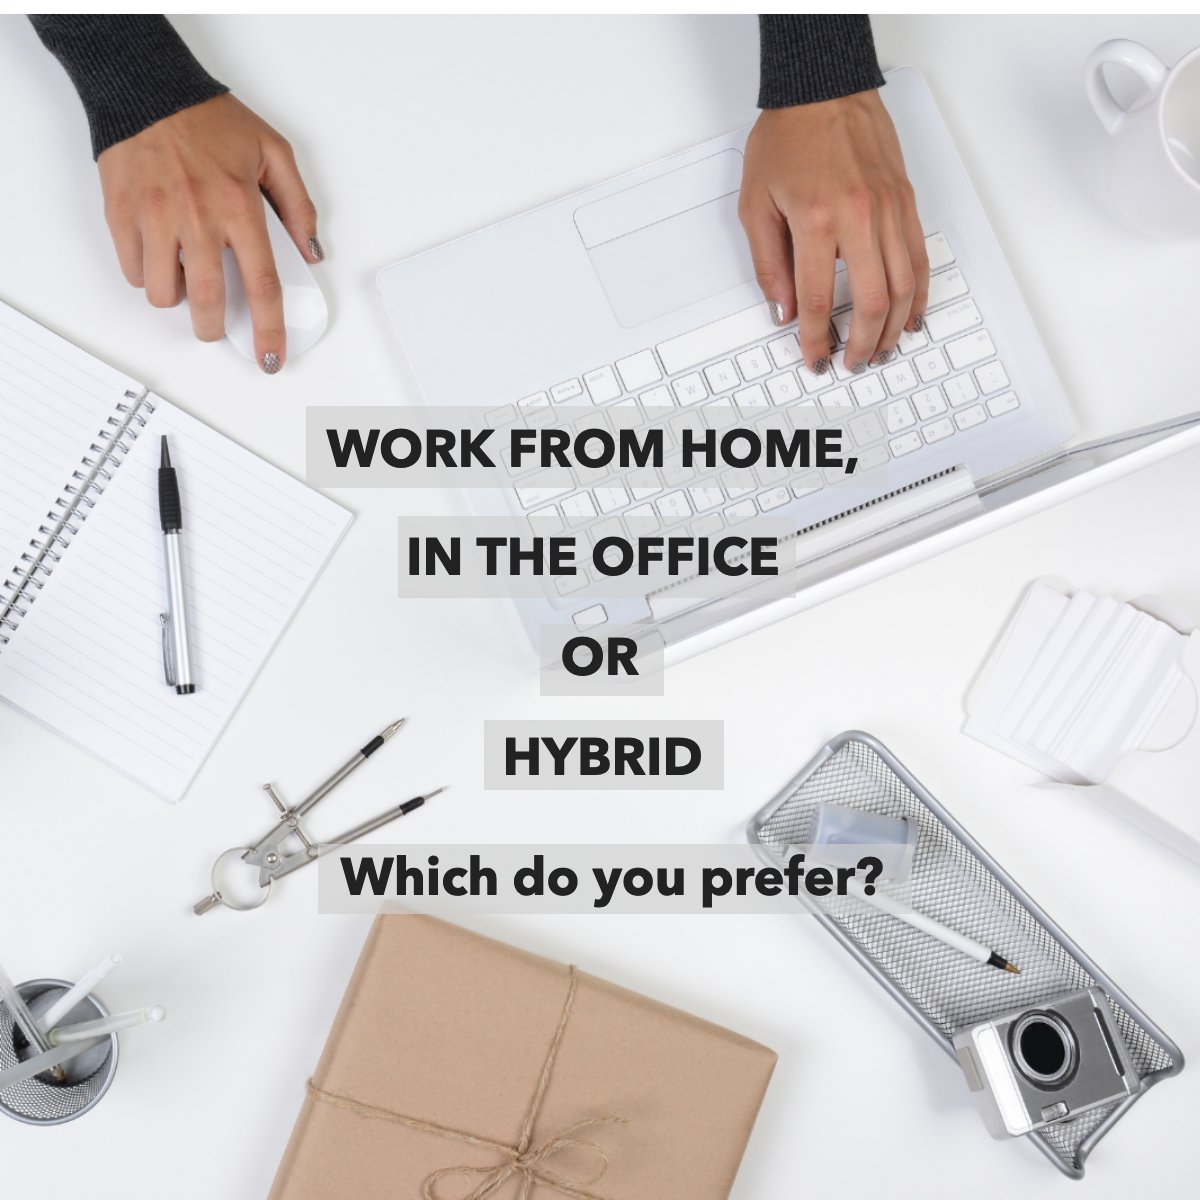 Do you have a dedicated working space? 💻
 
Tell us in the comments! 💭 

#question #workspace #worklife #homeoffice #hybridwork